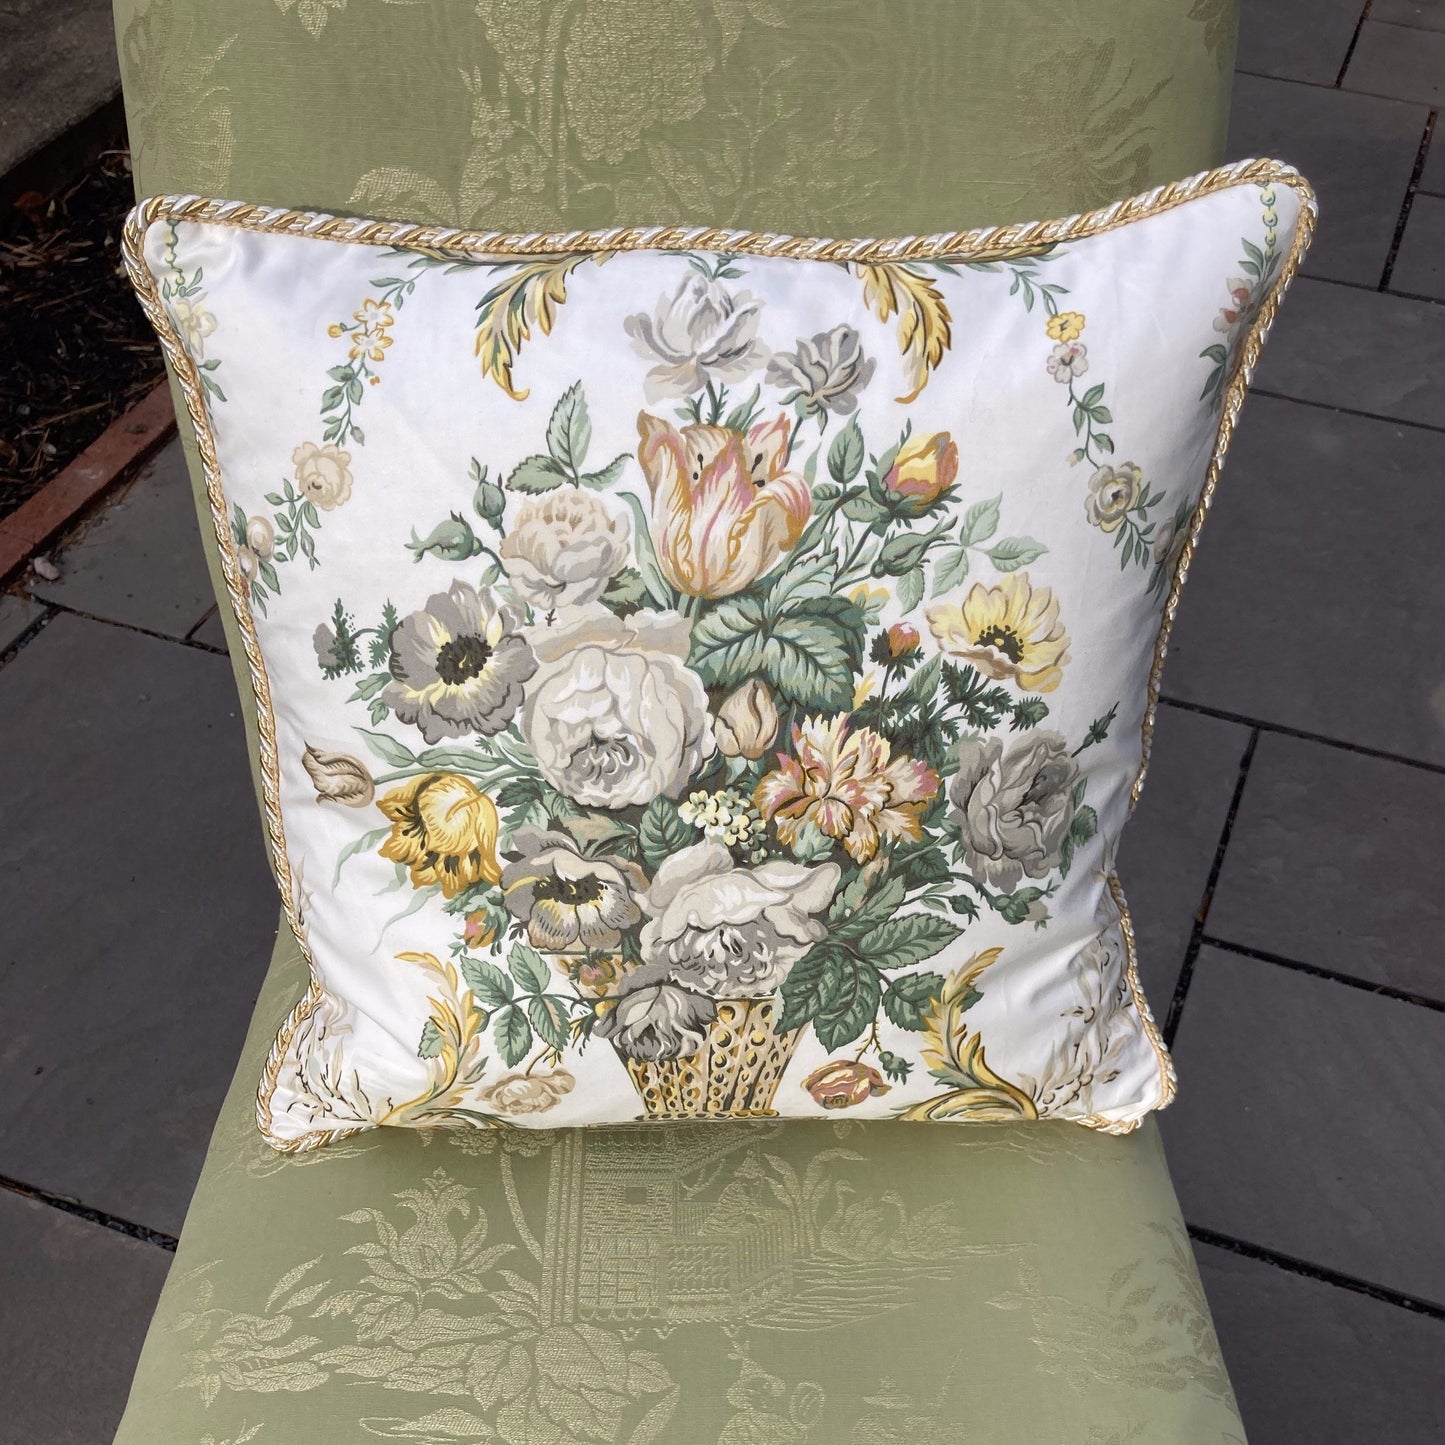 Schumacher Airlie Garden Urn Bouquet in Chintz with Lattice 17 x 17 Square Pillow Front with Down Feather Insert